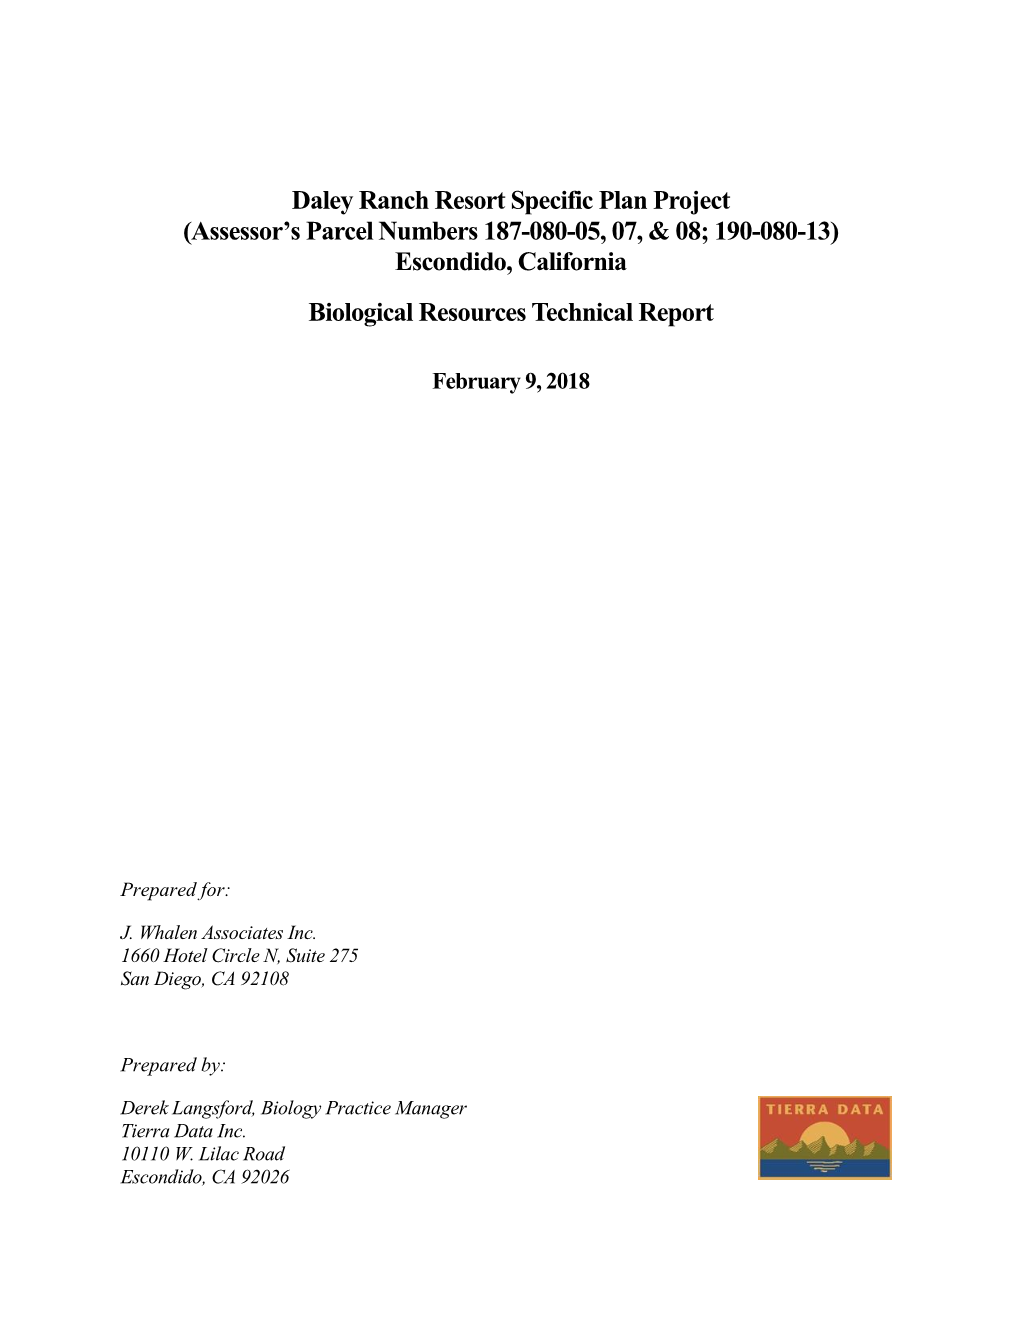 Daley Ranch Resort Specific Plan Project (Assessor’S Parcel Numbers 187-080-05, 07, & 08; 190-080-13) Escondido, California Biological Resources Technical Report